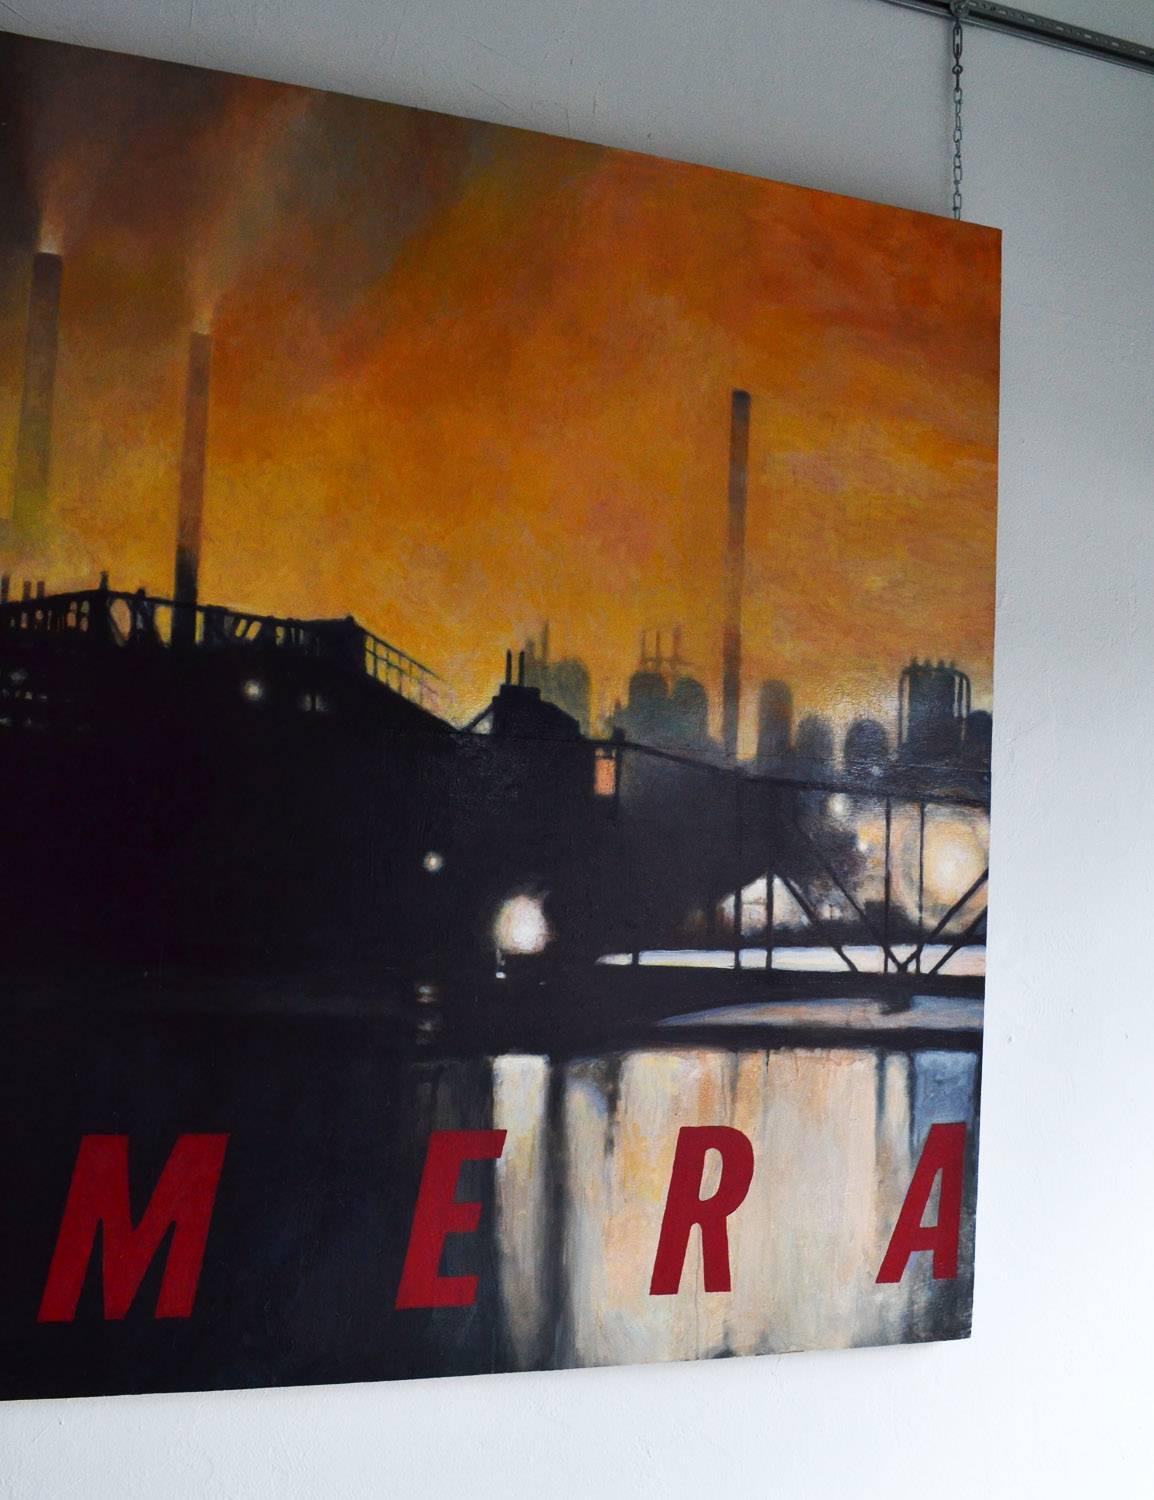 Massive industrial modern oil on board lawrence gipe factory series, 1998.
Lawrence Gipe Factory series oil on board, 1998 Untitled No. 15 monumental 60” x 84” mixed-media painting showing industrial factories and pollution highlighting the word